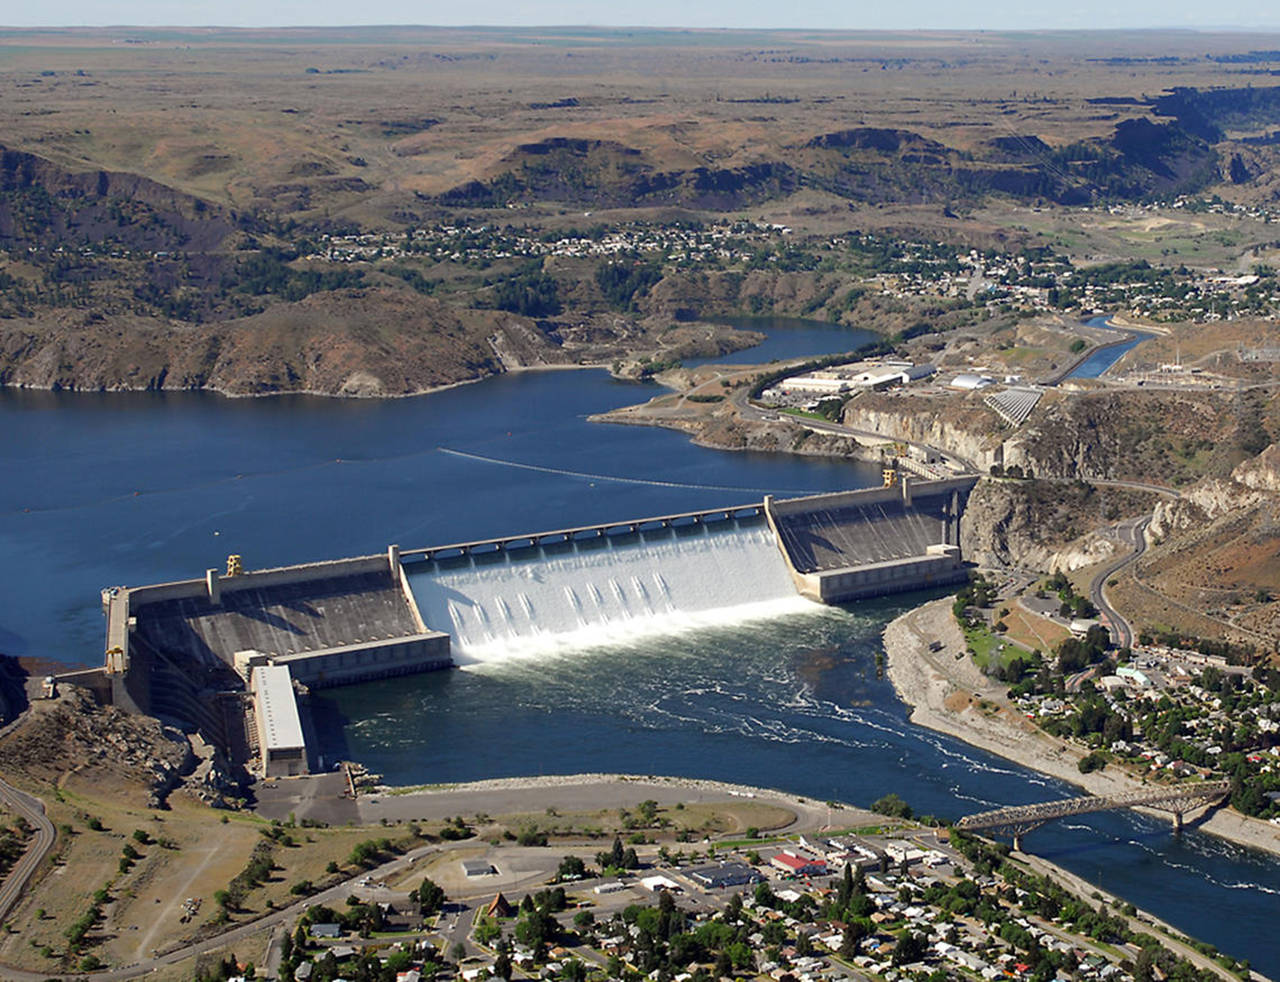 Among the Bonneville Power Administration dams that provide electricity to Washington state customers is the Grand Coulee Dam on the Columbia River in northcentral Washington. (Bureau of Reclamation)